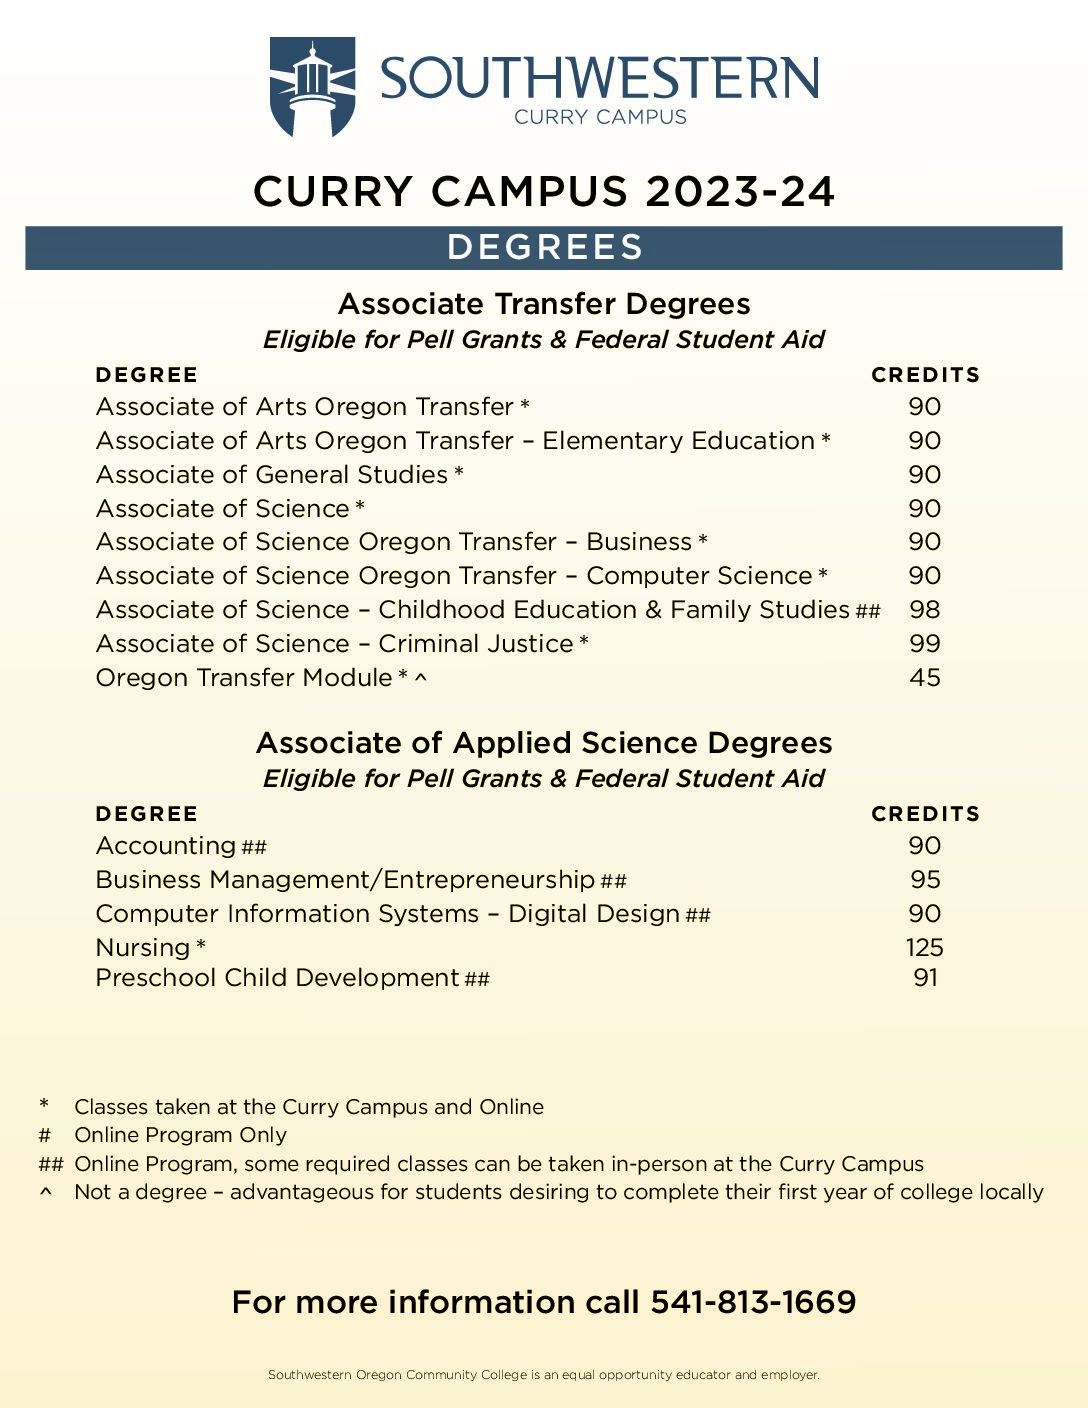 Document with a list of degrees